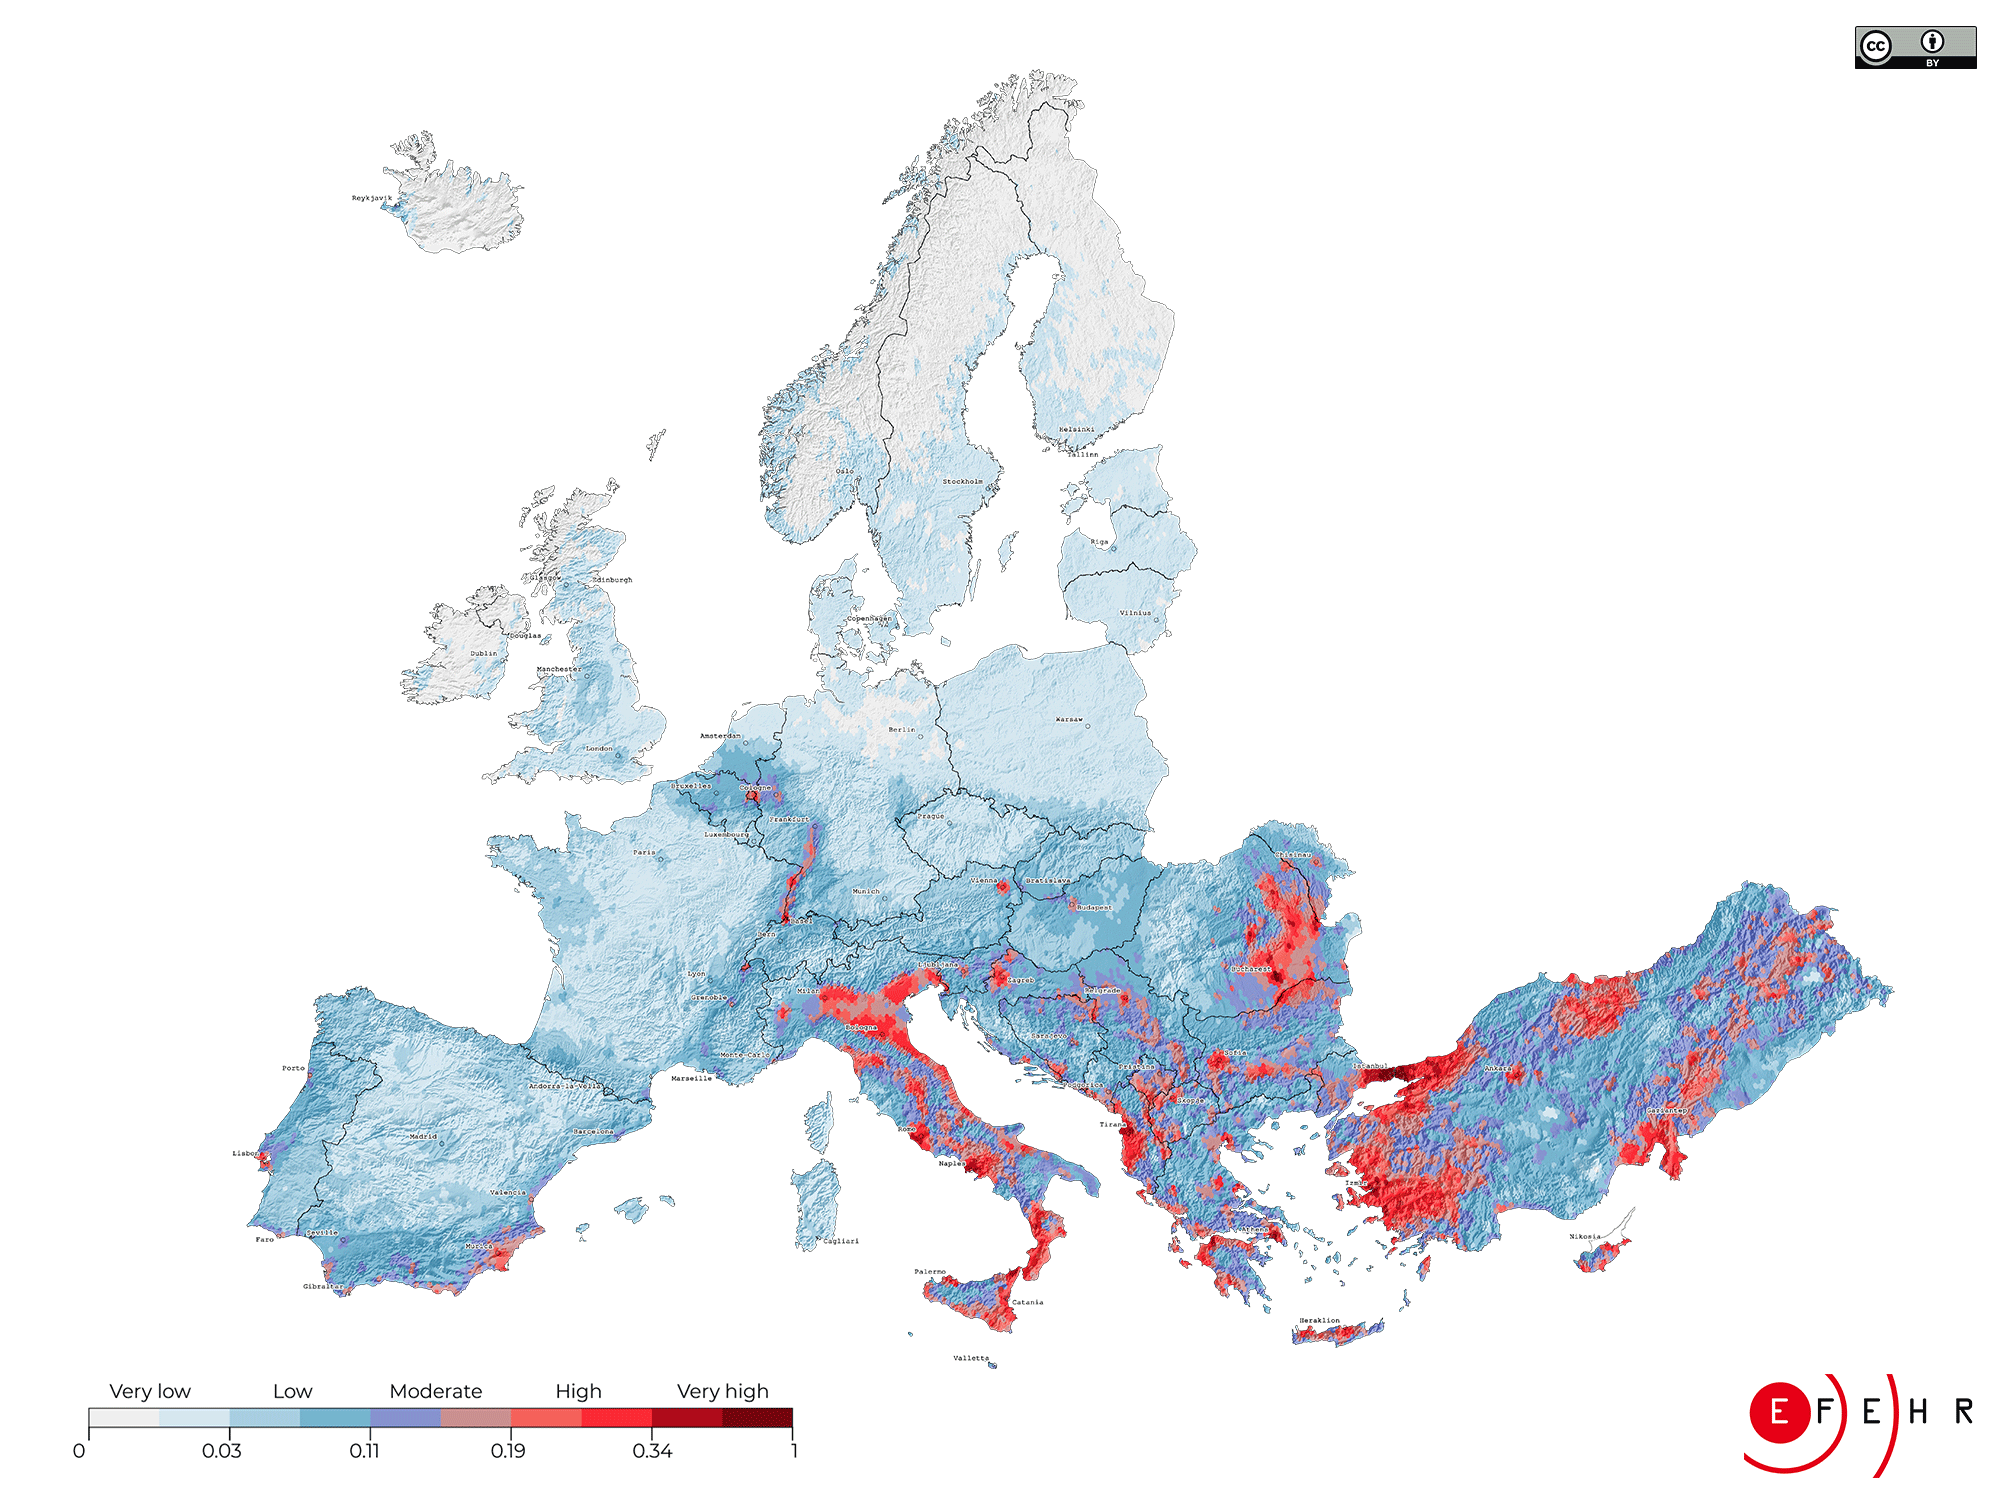 Europe's first earthquake risk model